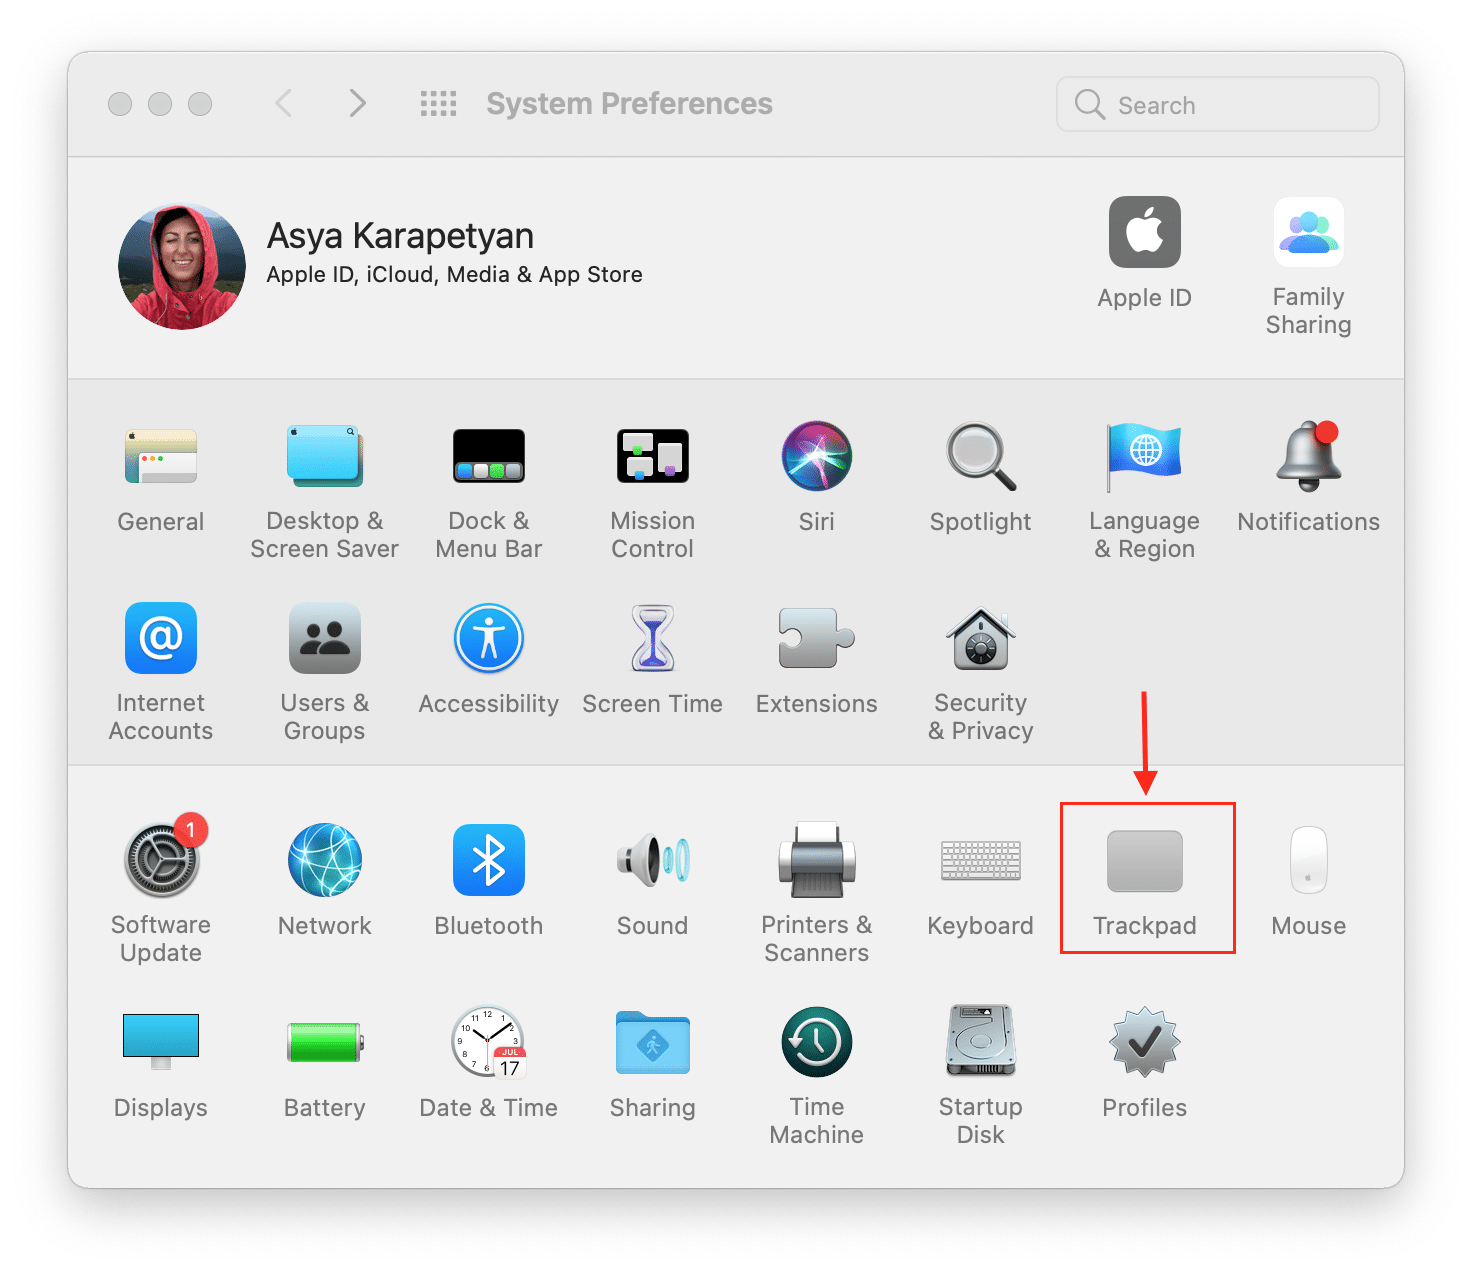 Preferences window with Trackpad section highlighted